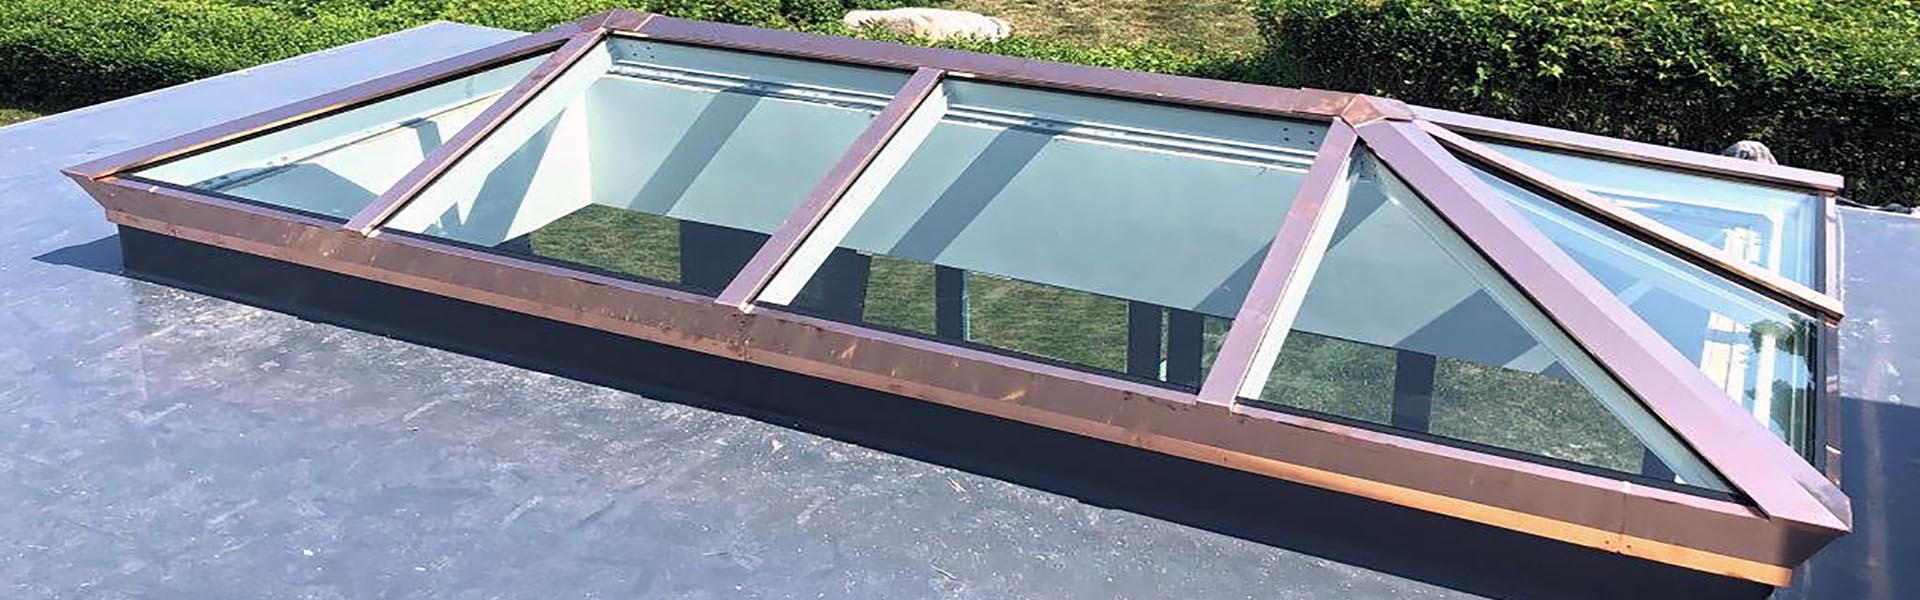 skylight repairs and fixes